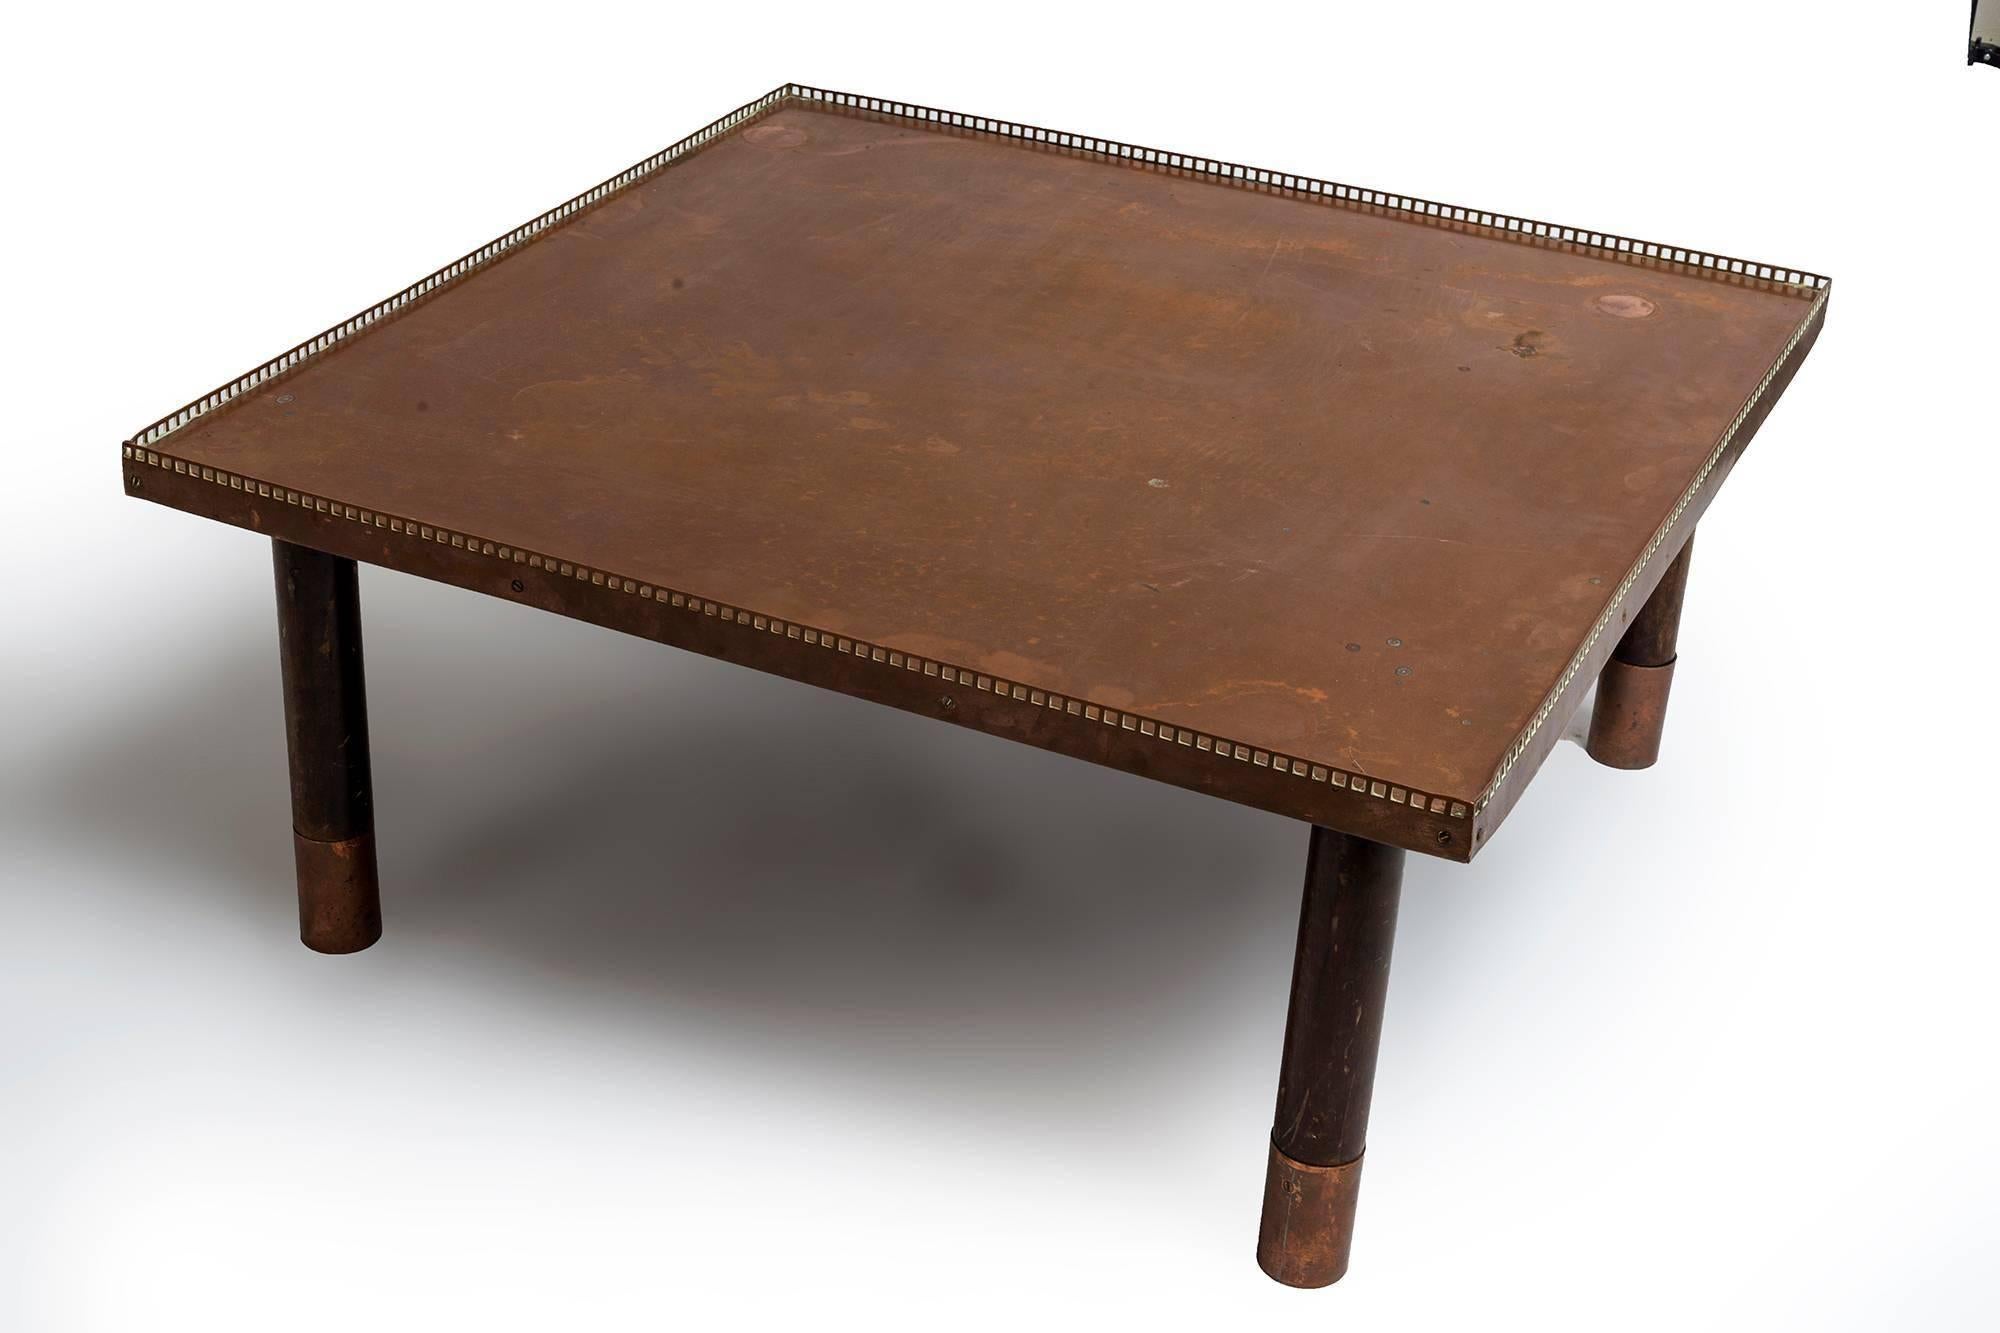 Two sets of large and smaller version of copper and brass end tables, French, 1900. Additional information shows dimensions and pricing for each of these sizes and variants. Two pairs of mahogany/bronze side table one with copper covered tops.